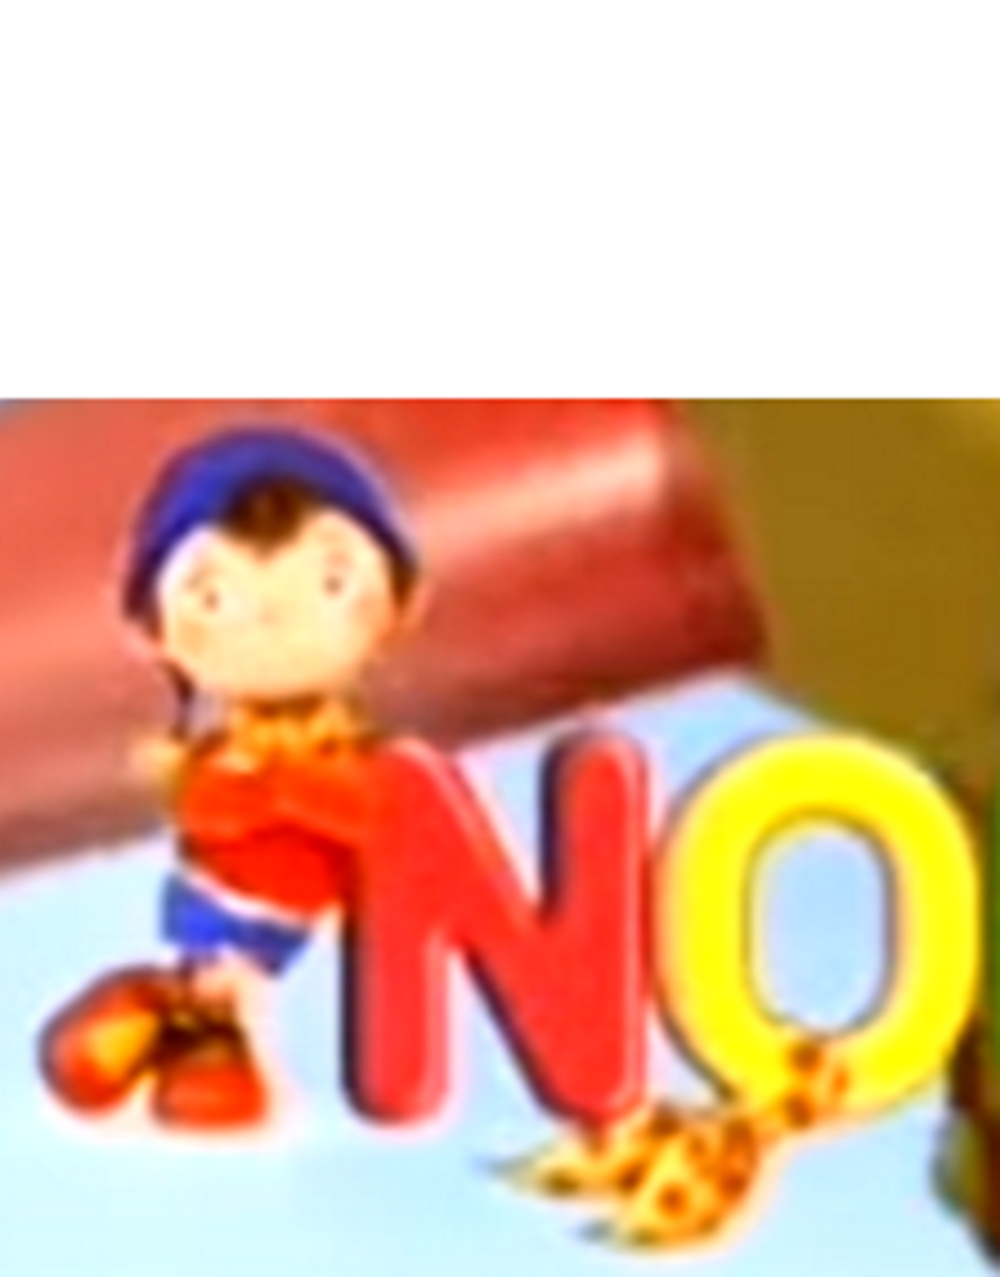 Noddy No Meme Template By Pacster13 On Deviantart